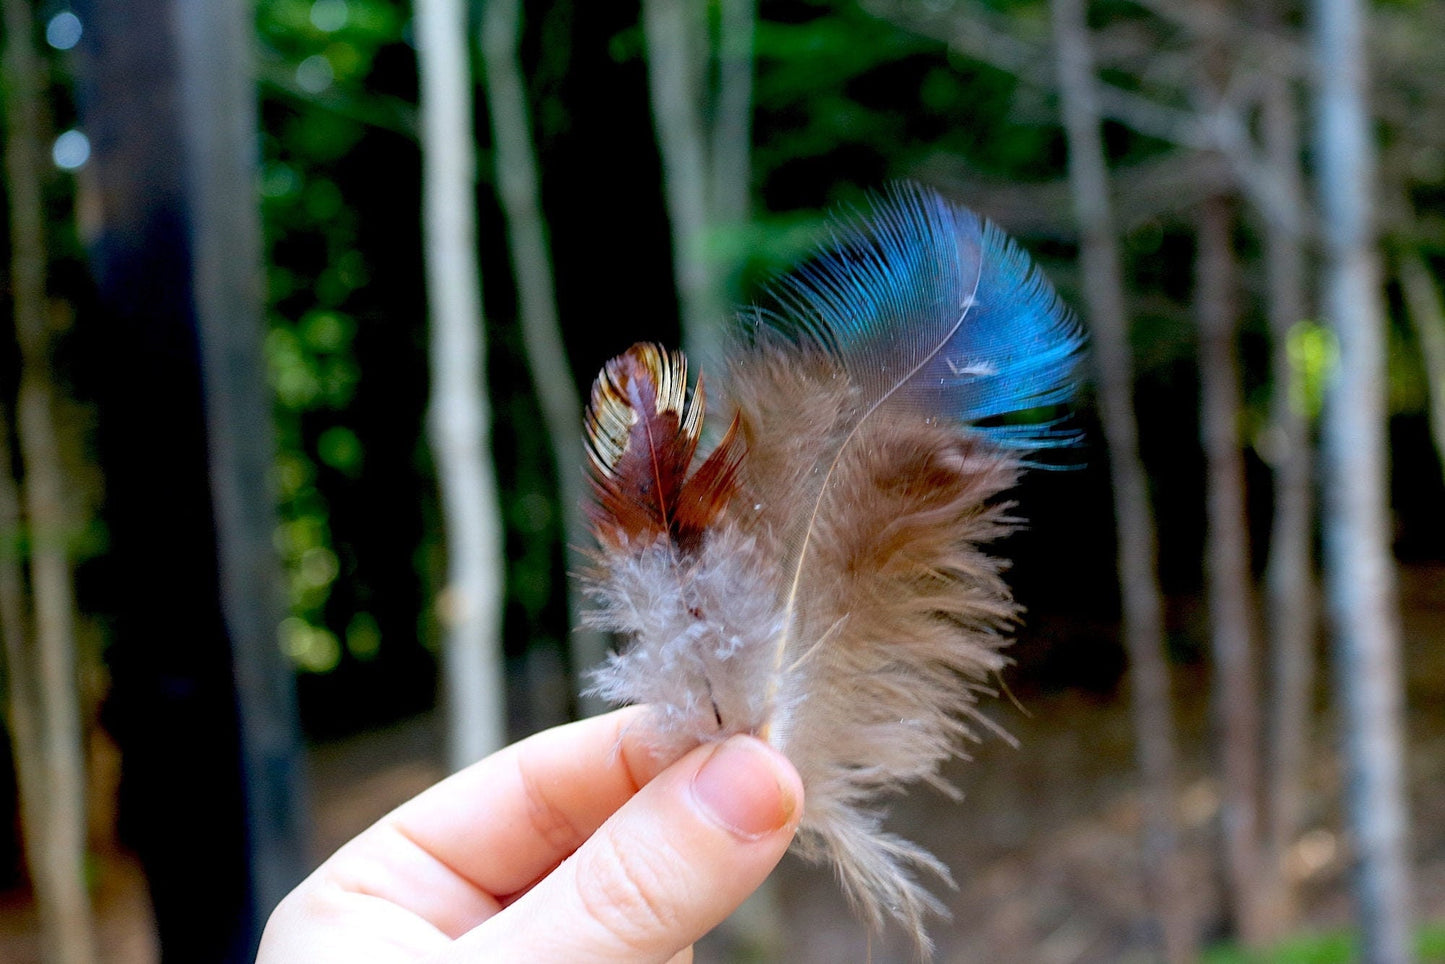 Real Mixed Feathers - 48 Pack | Ethically Sourced Bird Feathers for Craft Supply | Fly Fishing, Art & Crafts | Goblincore Nature Lovers